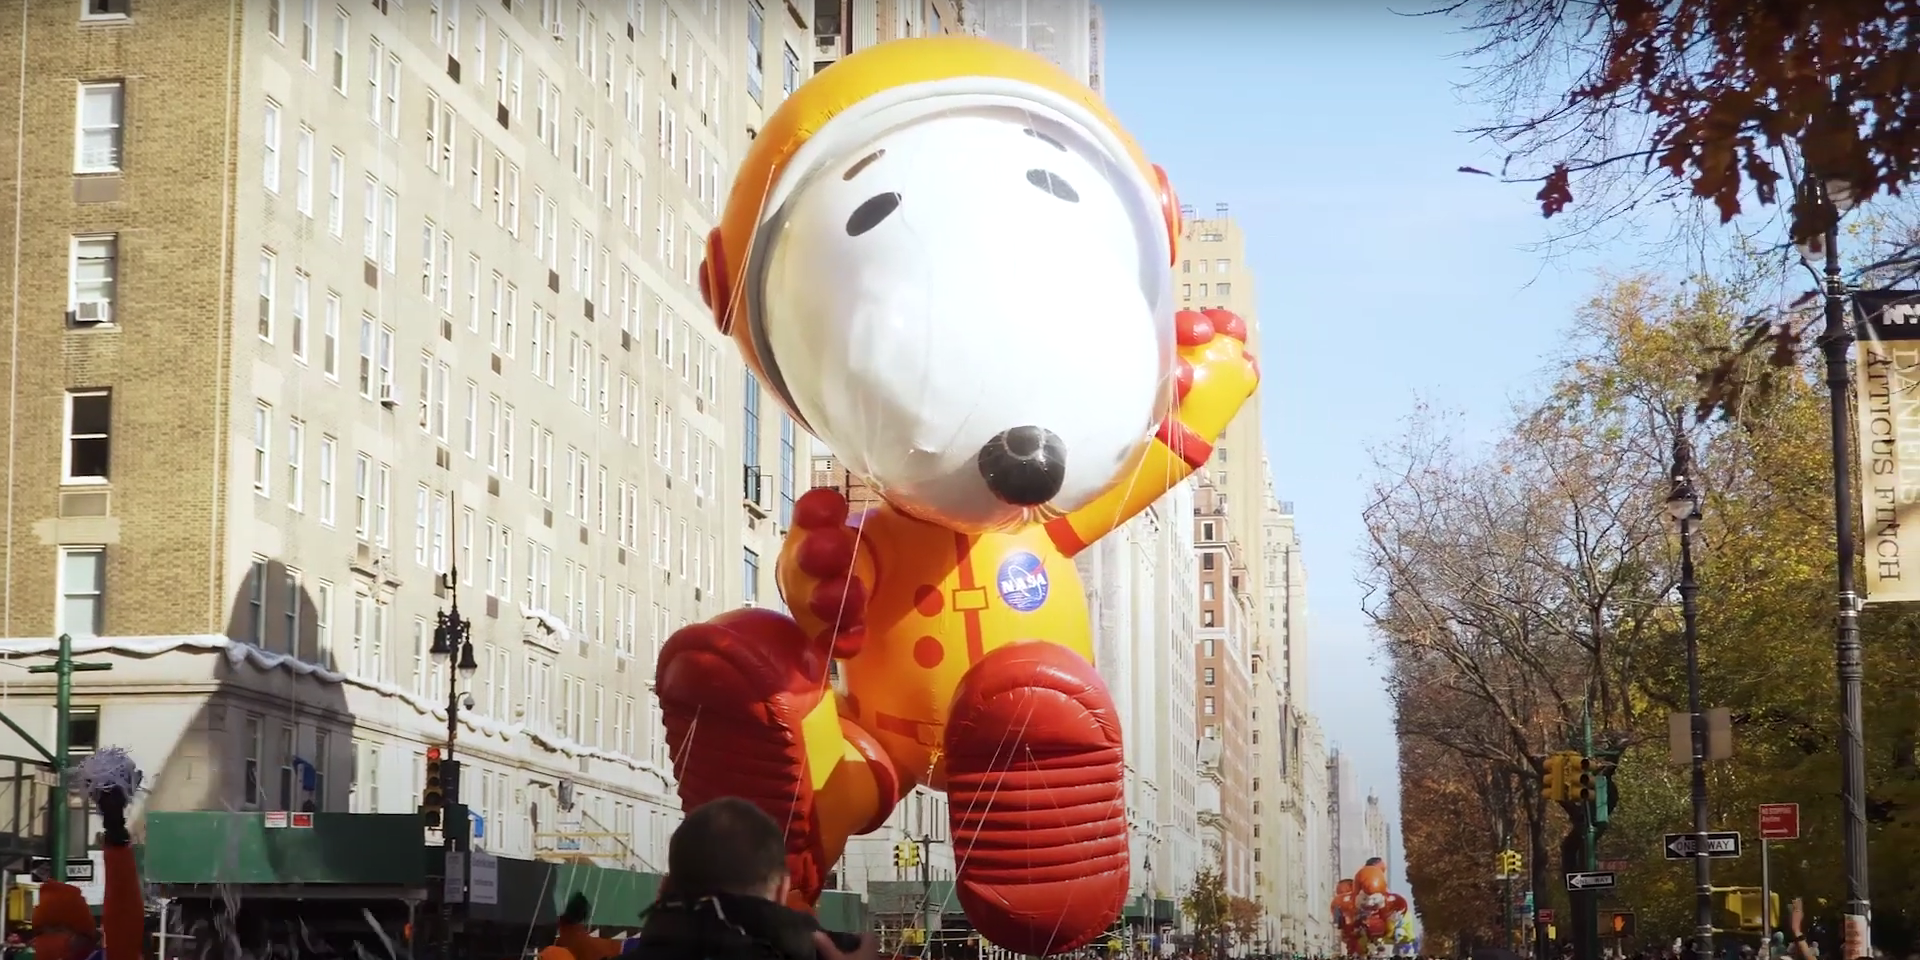 Snoopy in Macy's Thanksgiving Parade